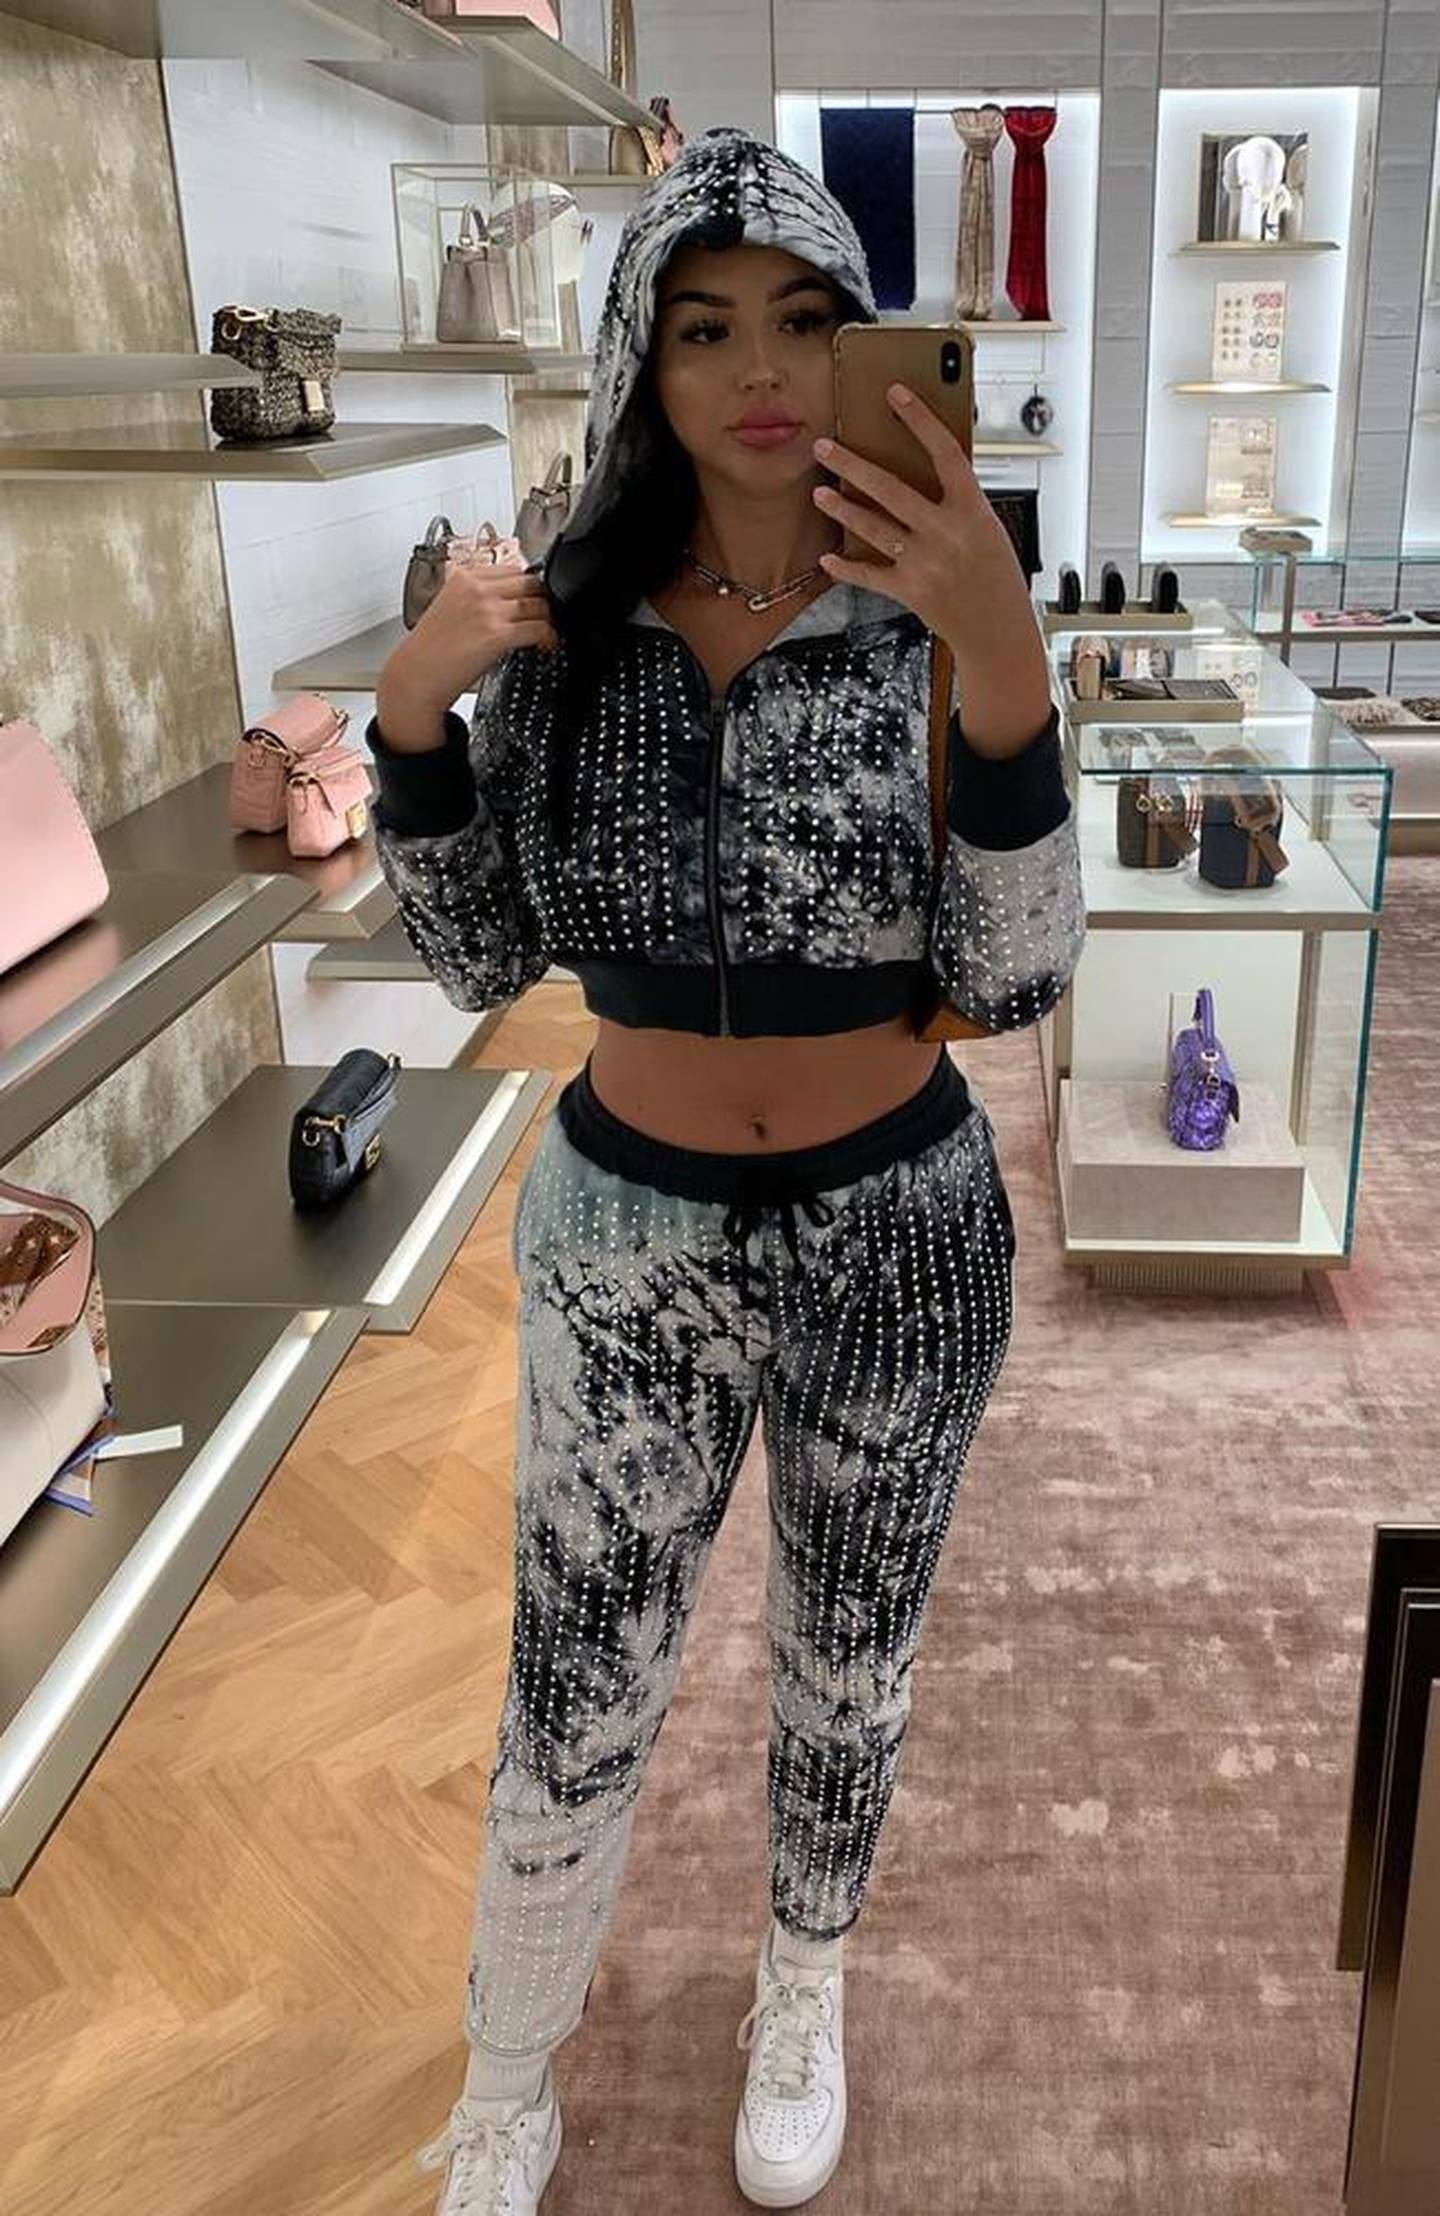 Onlyfans Star Anna Paul Reveals Truth Behind Lavish Lifestyle In